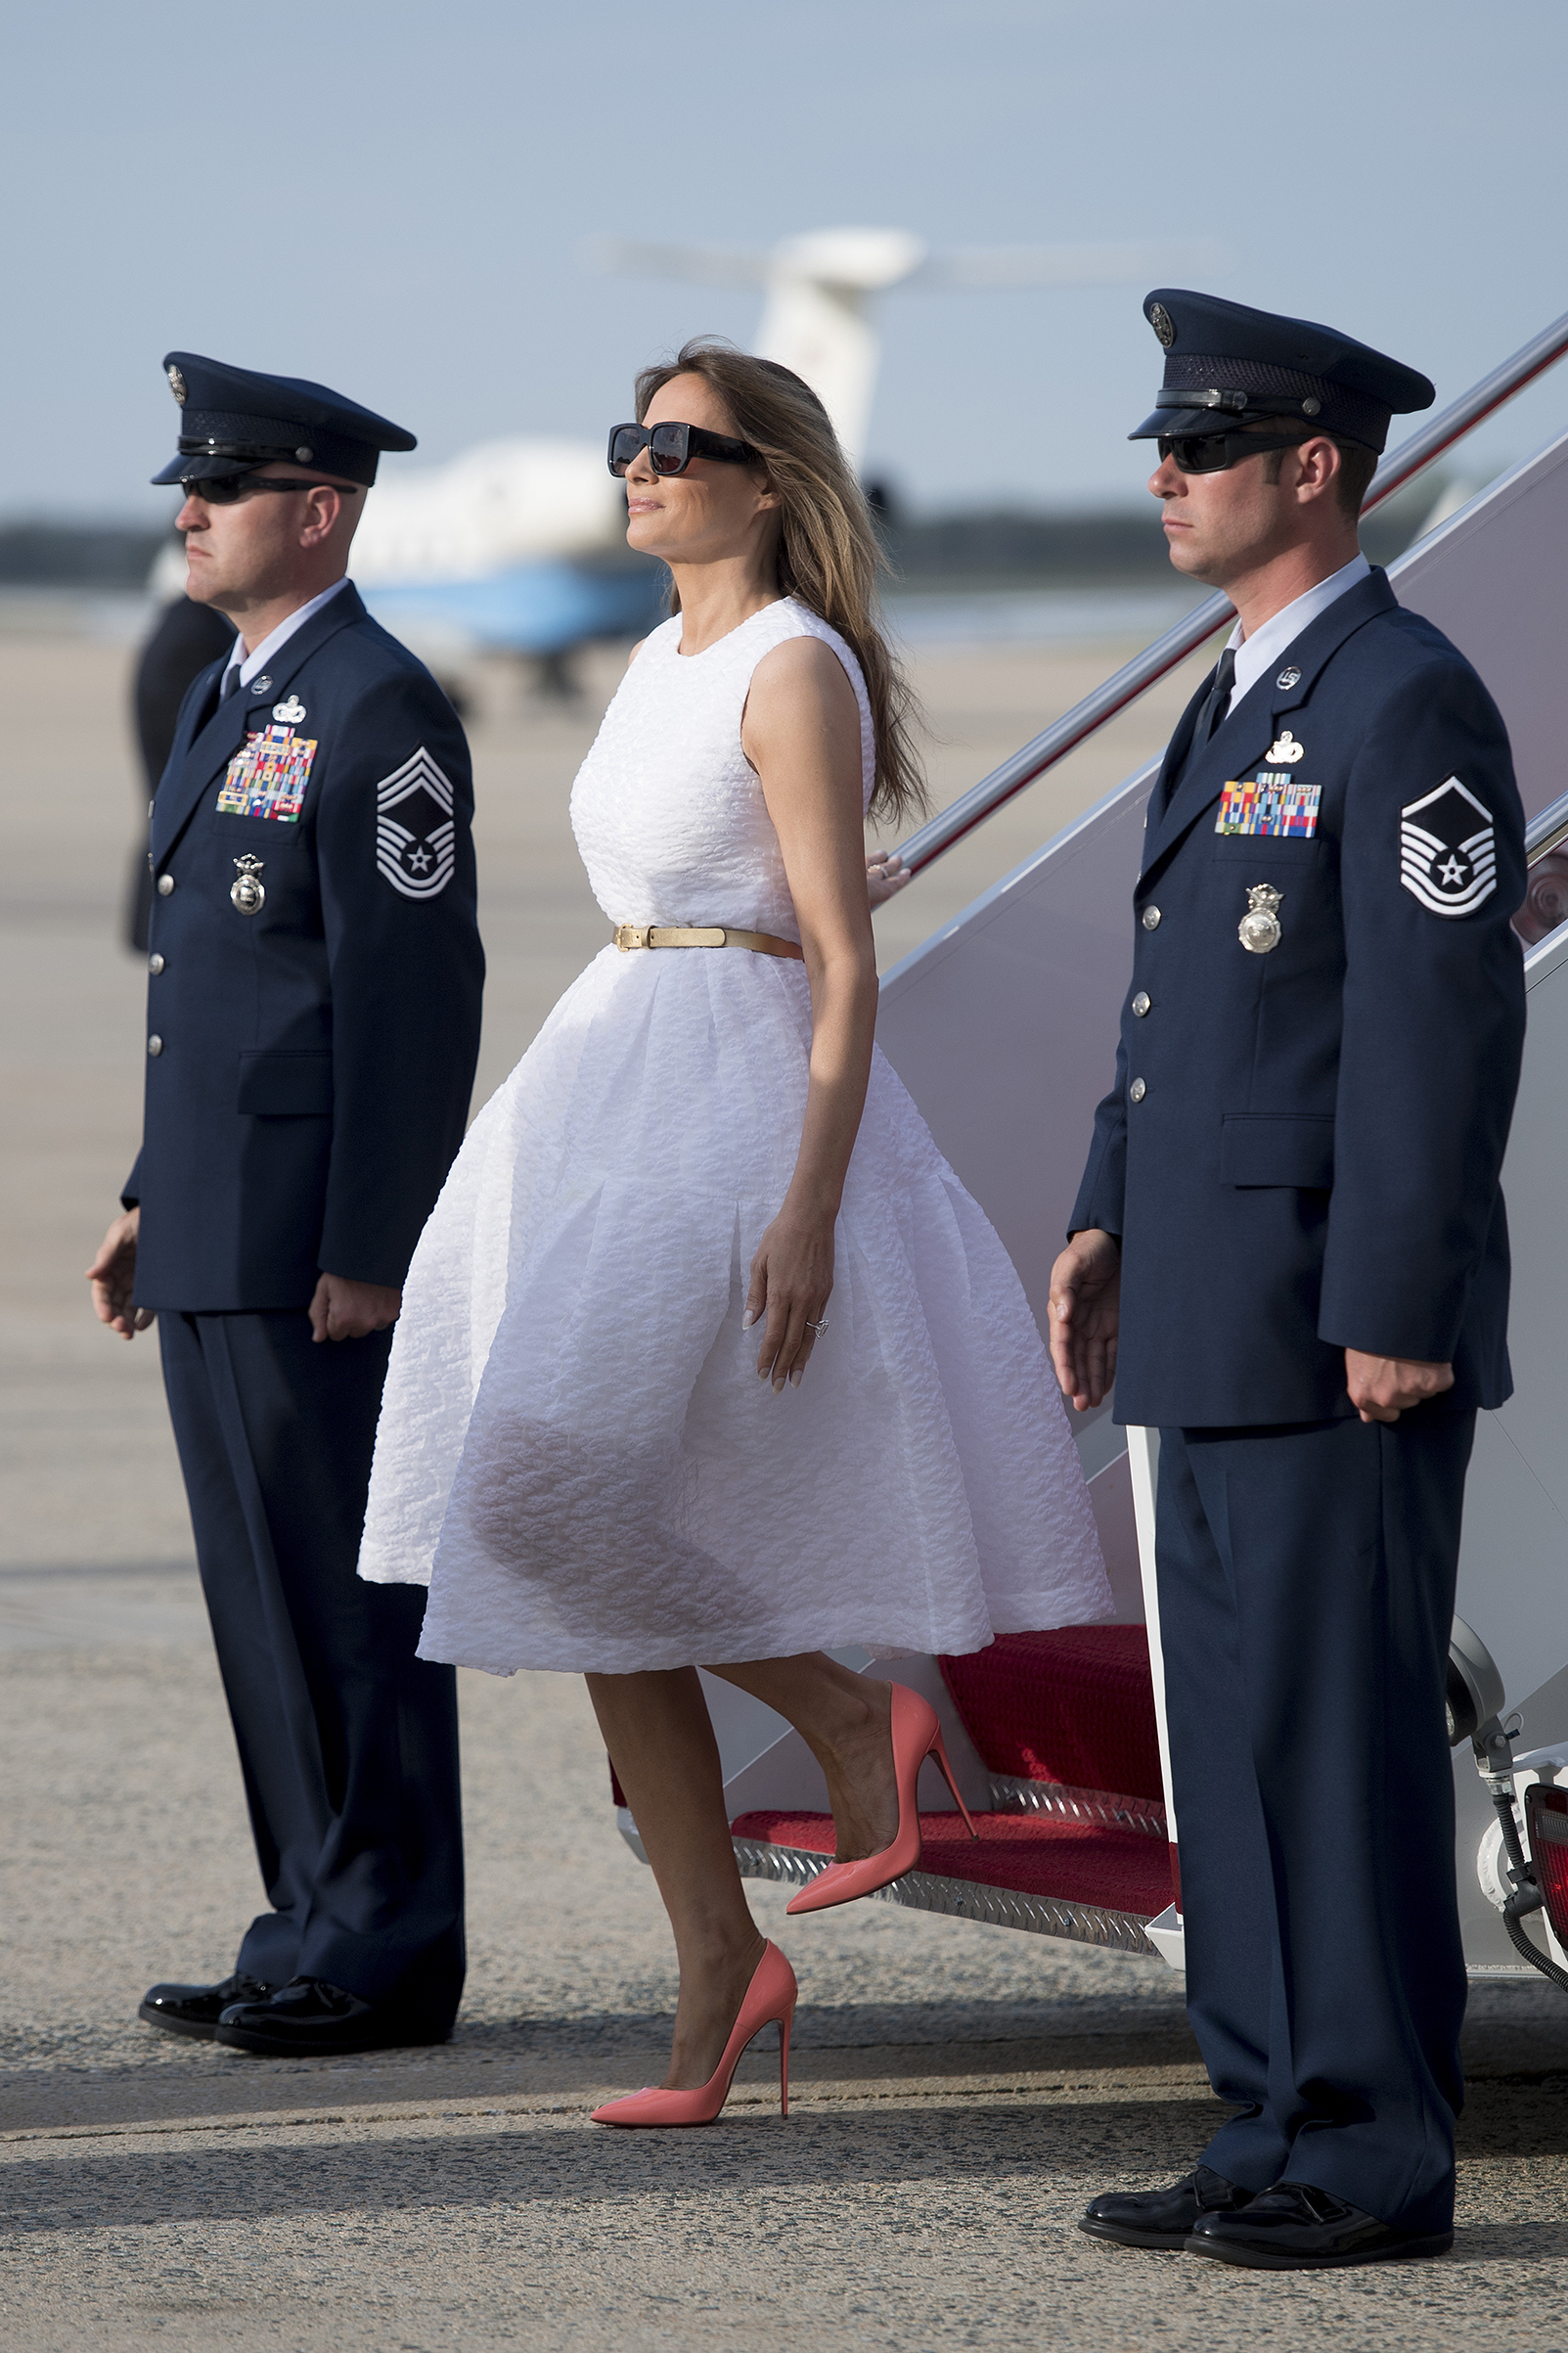 First lady Melania Trump wearing Simone Rocha dress and Christian Louboutin shoes, walks off Air Force One at Andrews Air Force Base, MD, April 16, 2017.